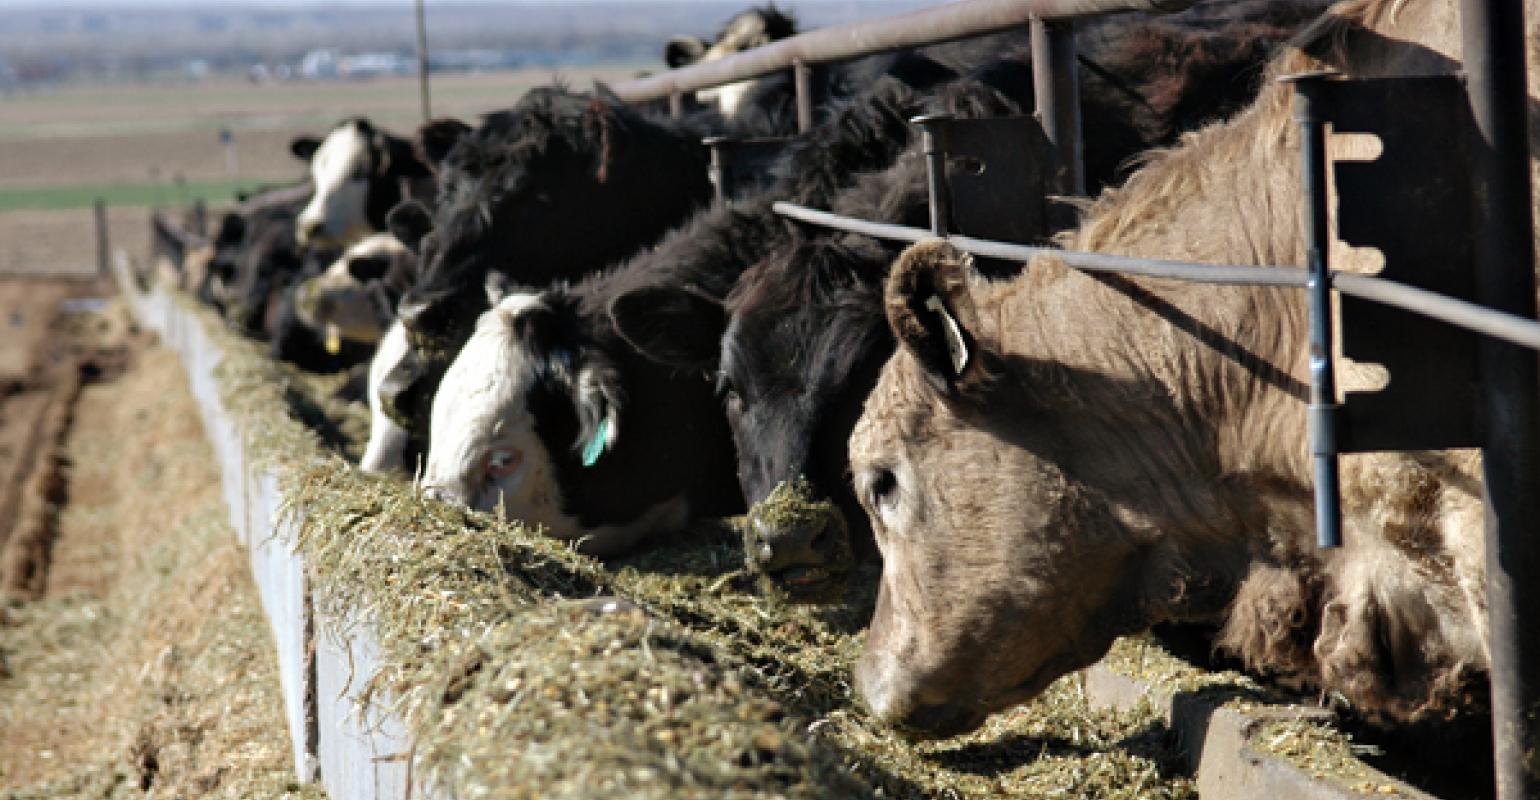 Op-Ed: Cattle Market Reform Necessary for a Sovereign, Secure Food System